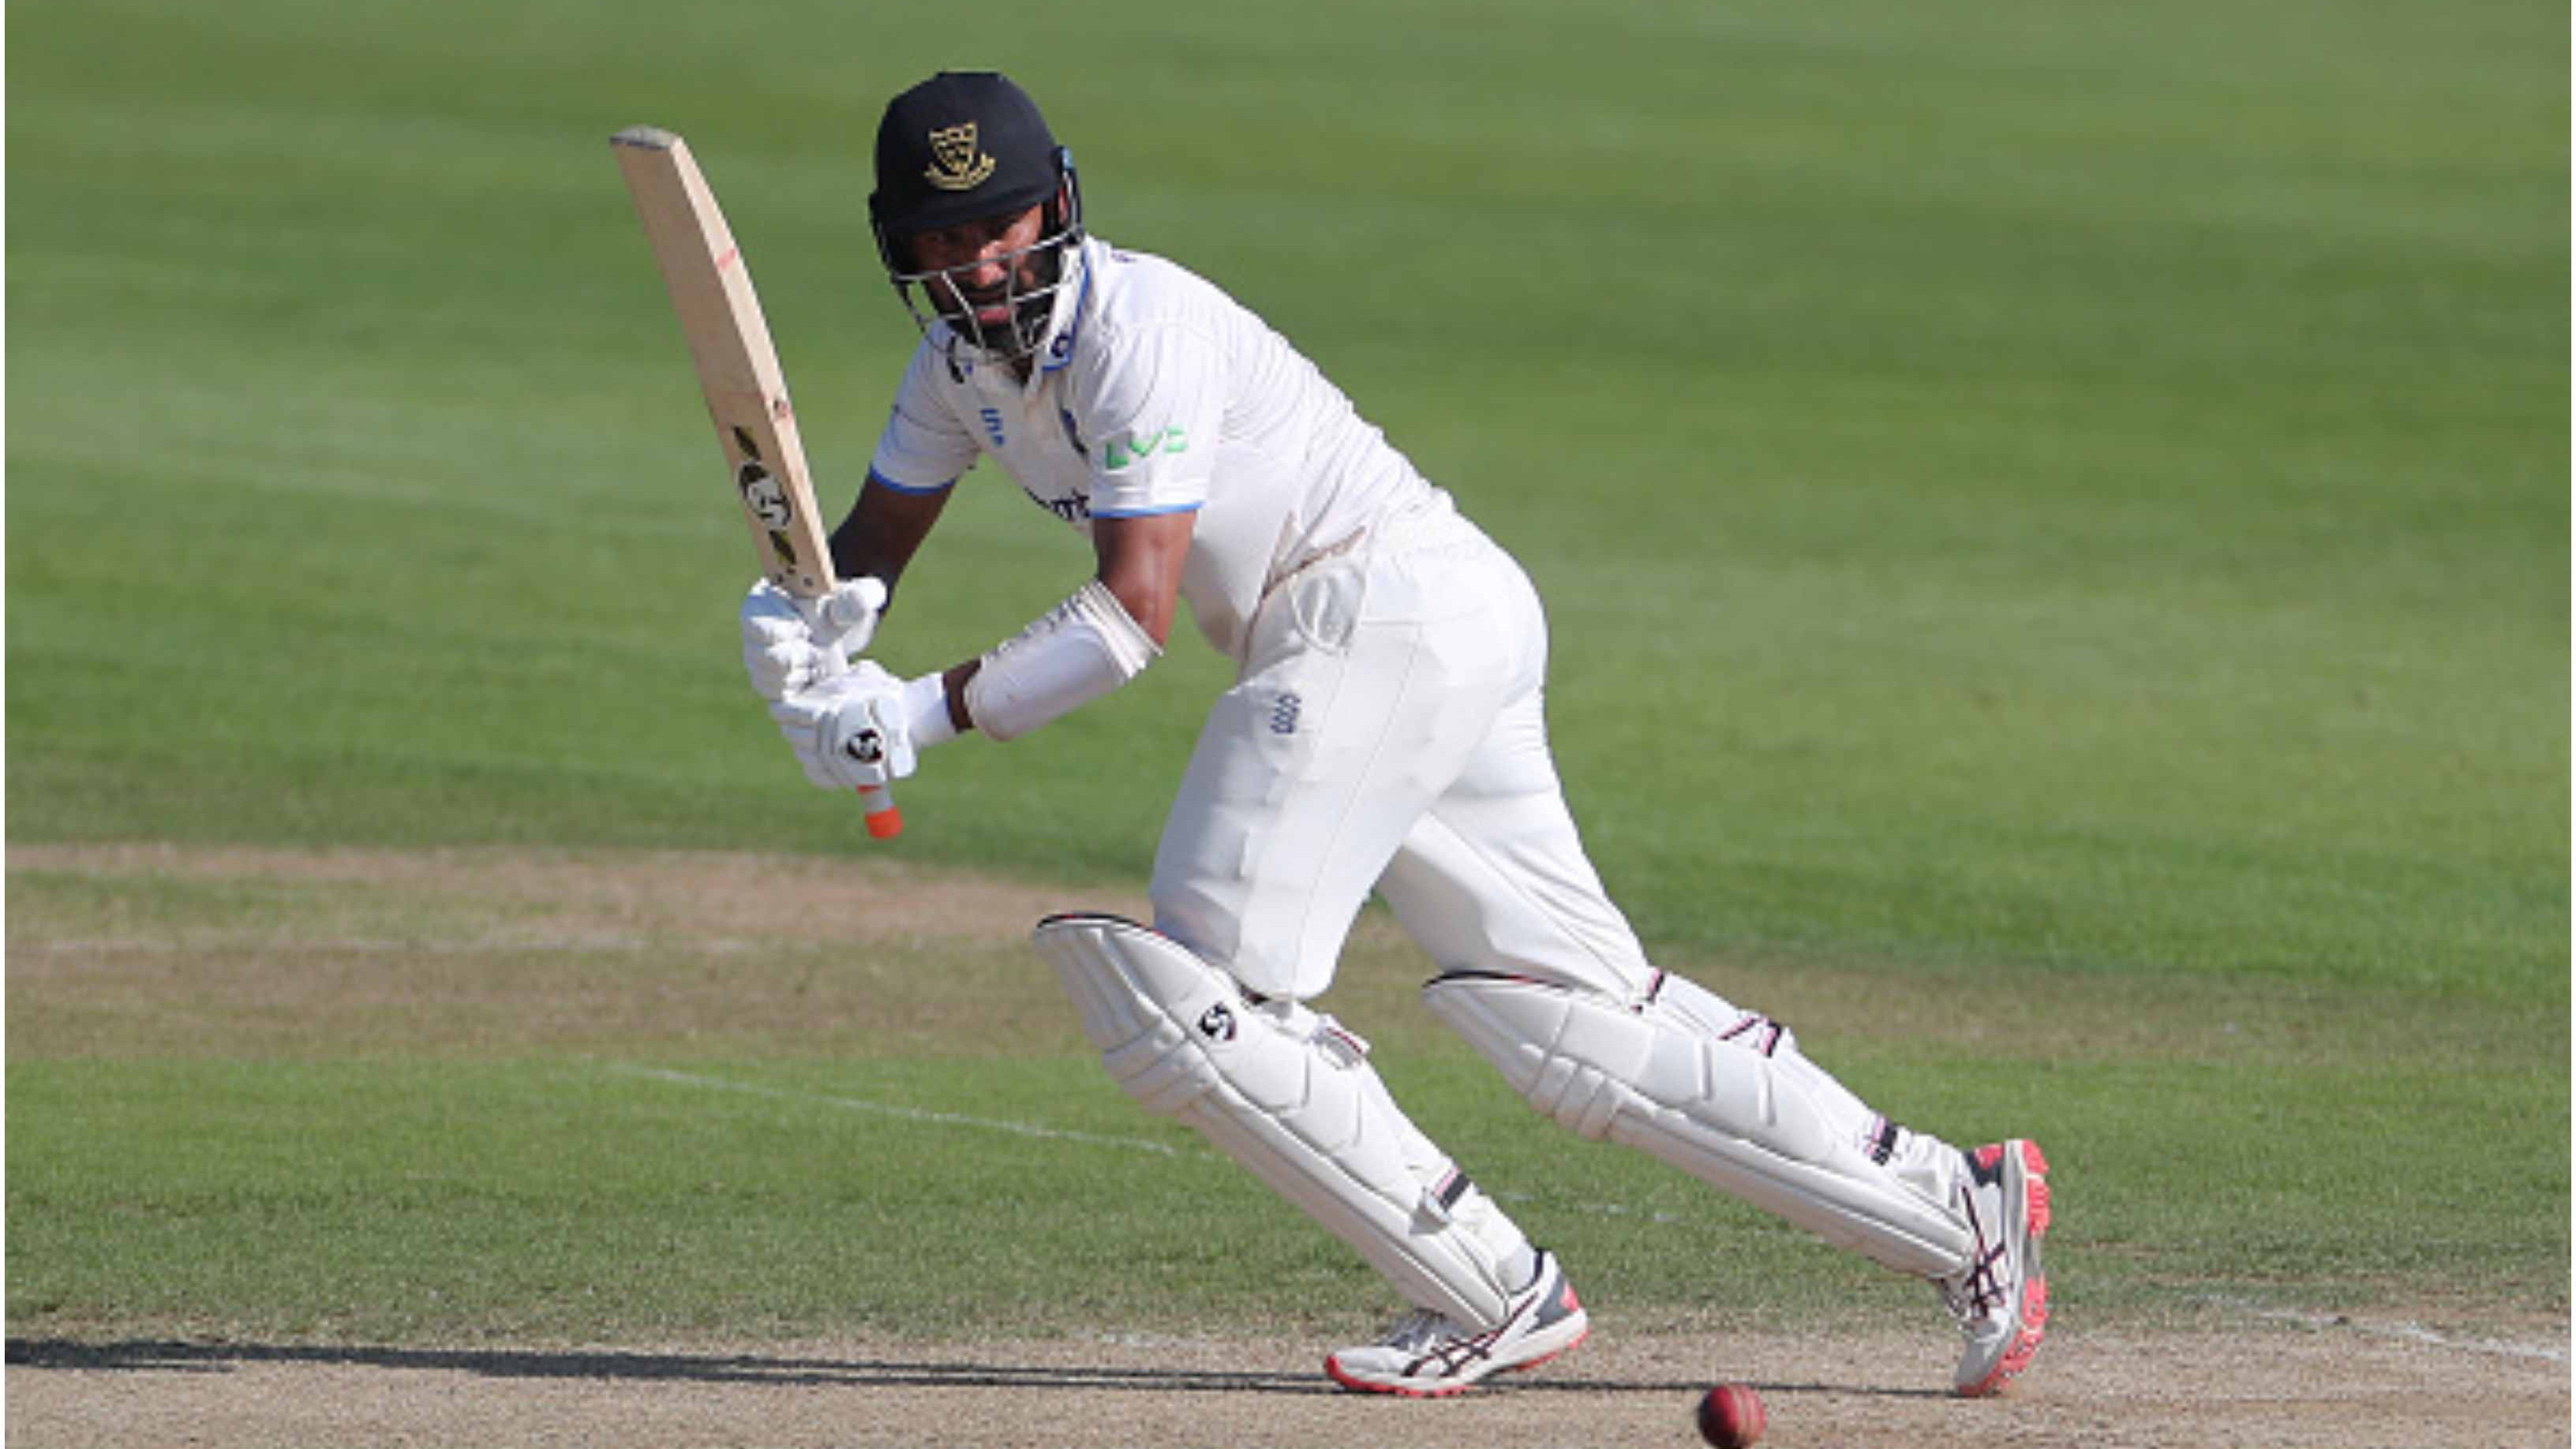 Cheteshwar Pujara suspended for one English county match; Sussex docked 12 points for ill-discipline